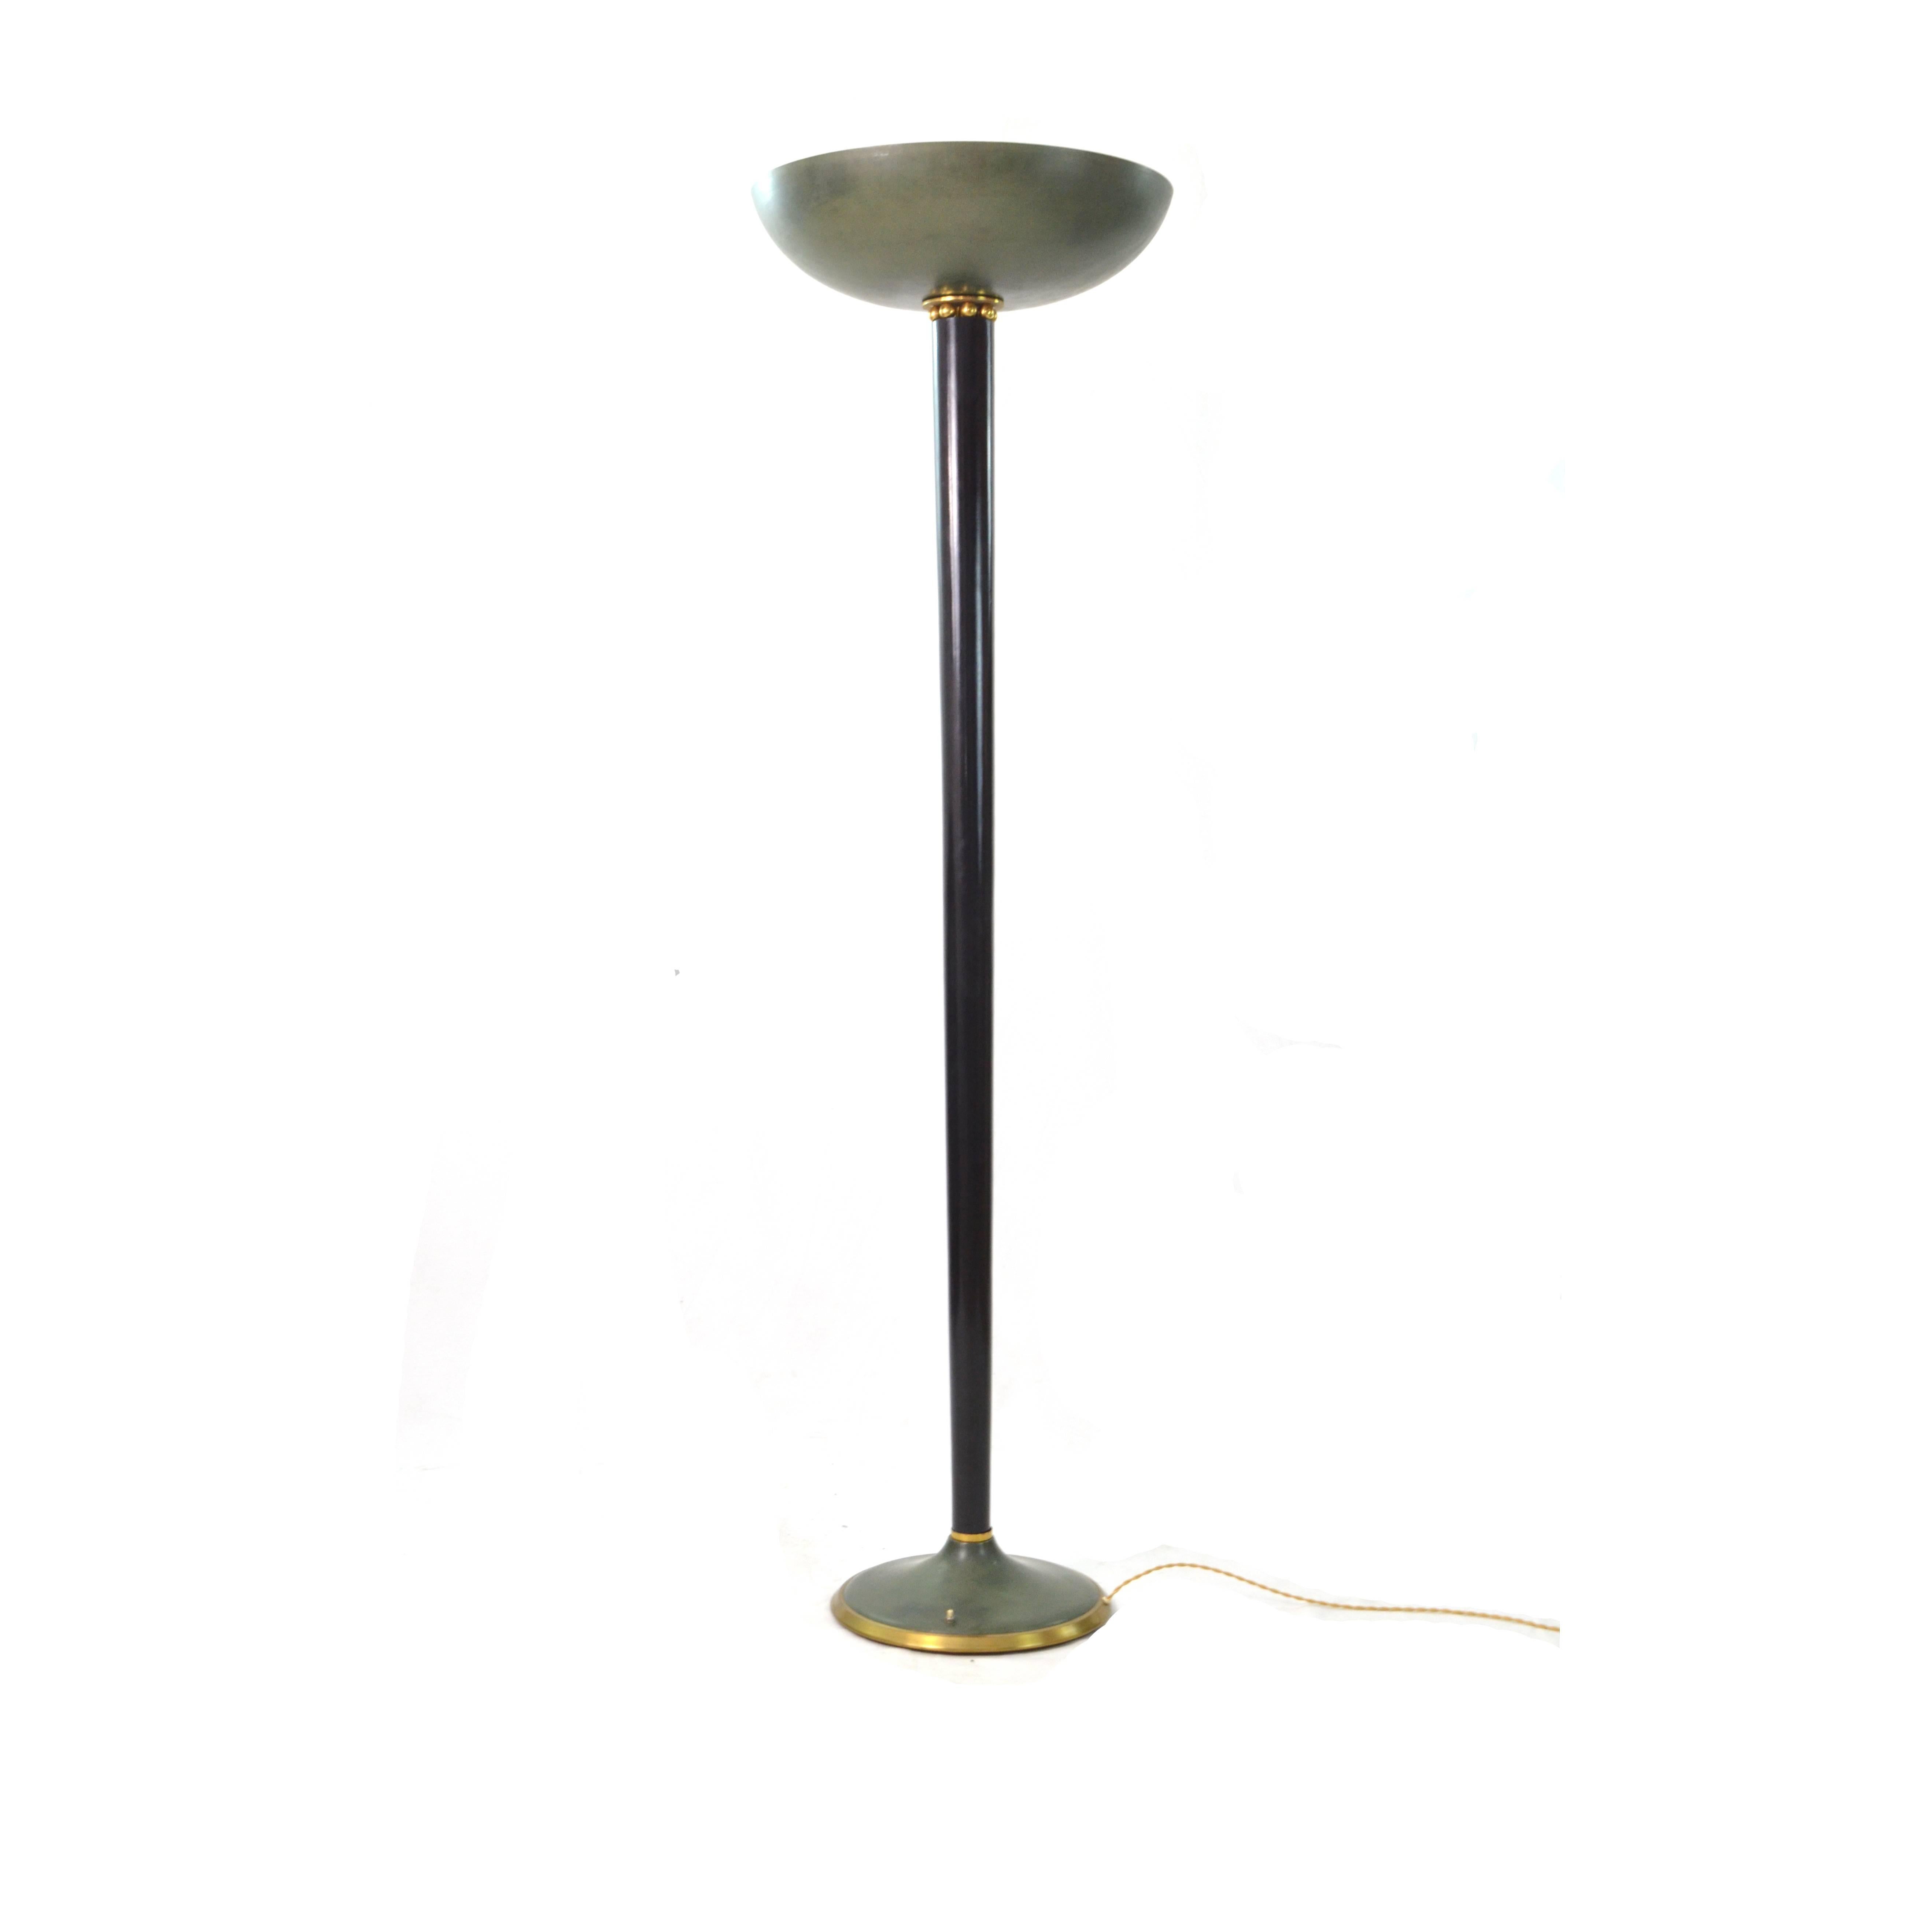 1930s Art Deco French floor lamp very elegant and fine with brass marbles crown detail and dark green lacquered lampshade. Rewired and restored in conservative way in the wooden part which remain dark  chocolate color. During the restoration we